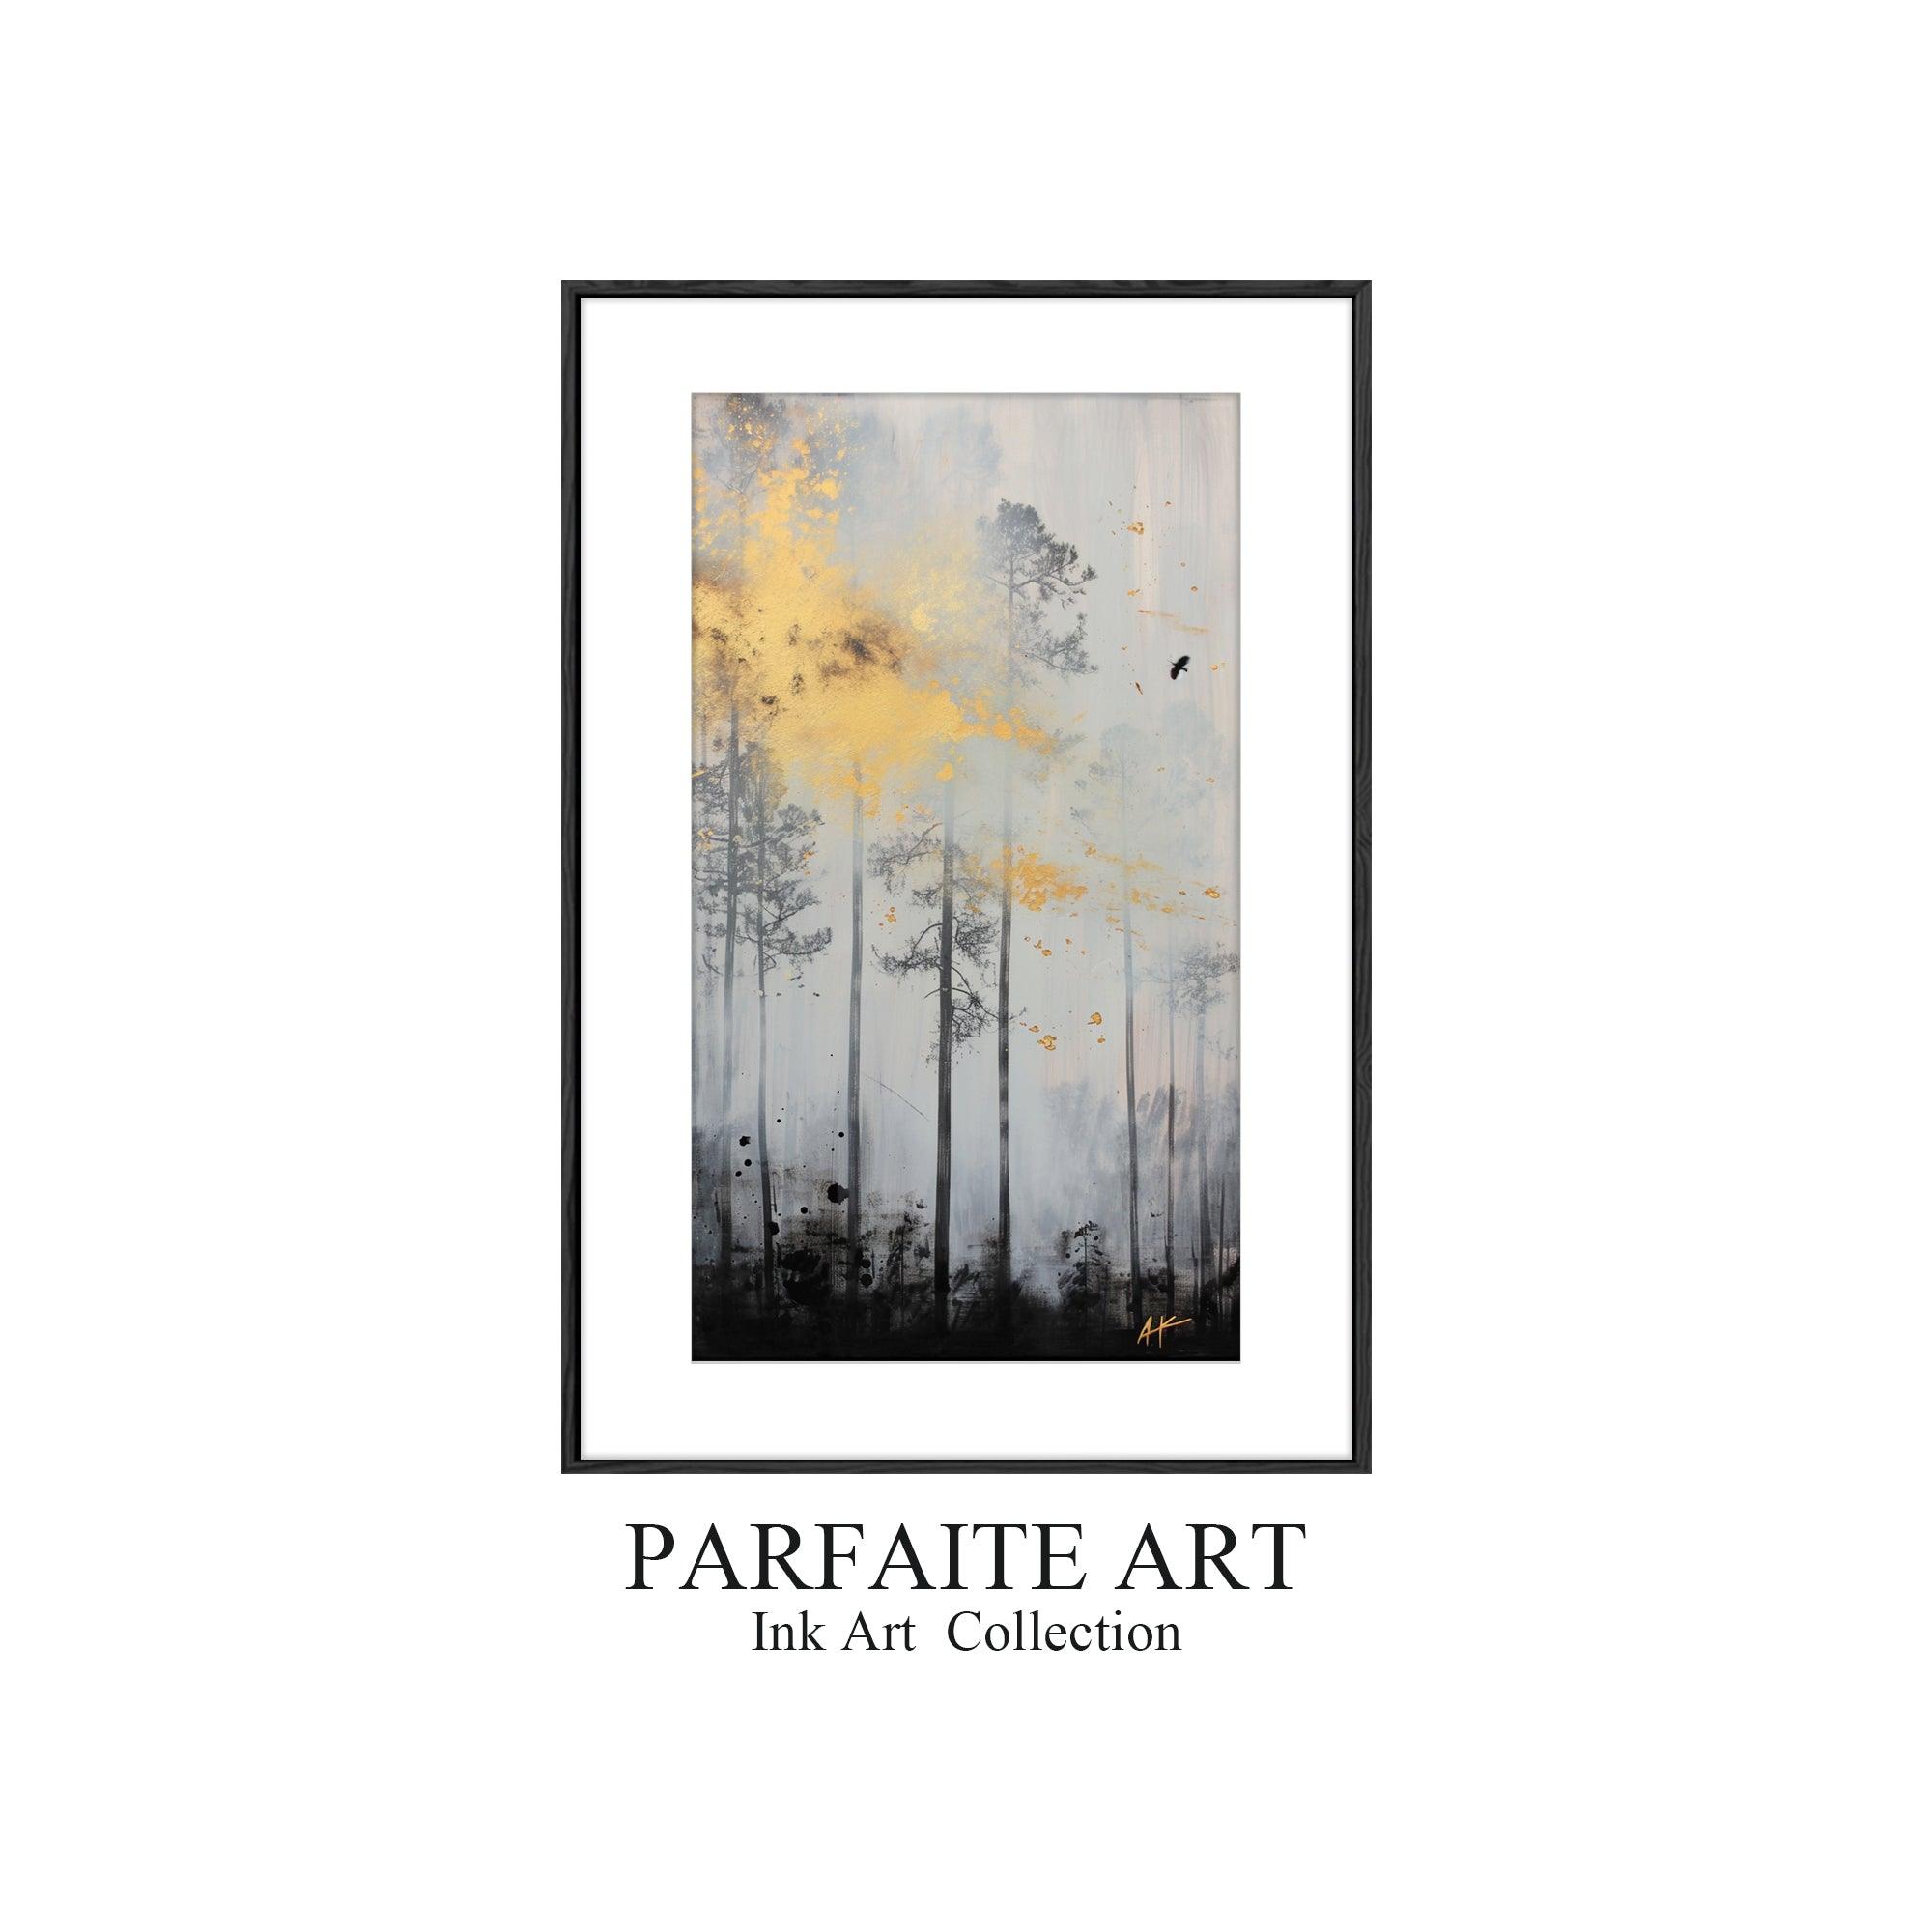 Abstract Alcohol Ink Art on Framed Fine Art Paper - Giclée Prints for an Enigmatic Ambiance Frame